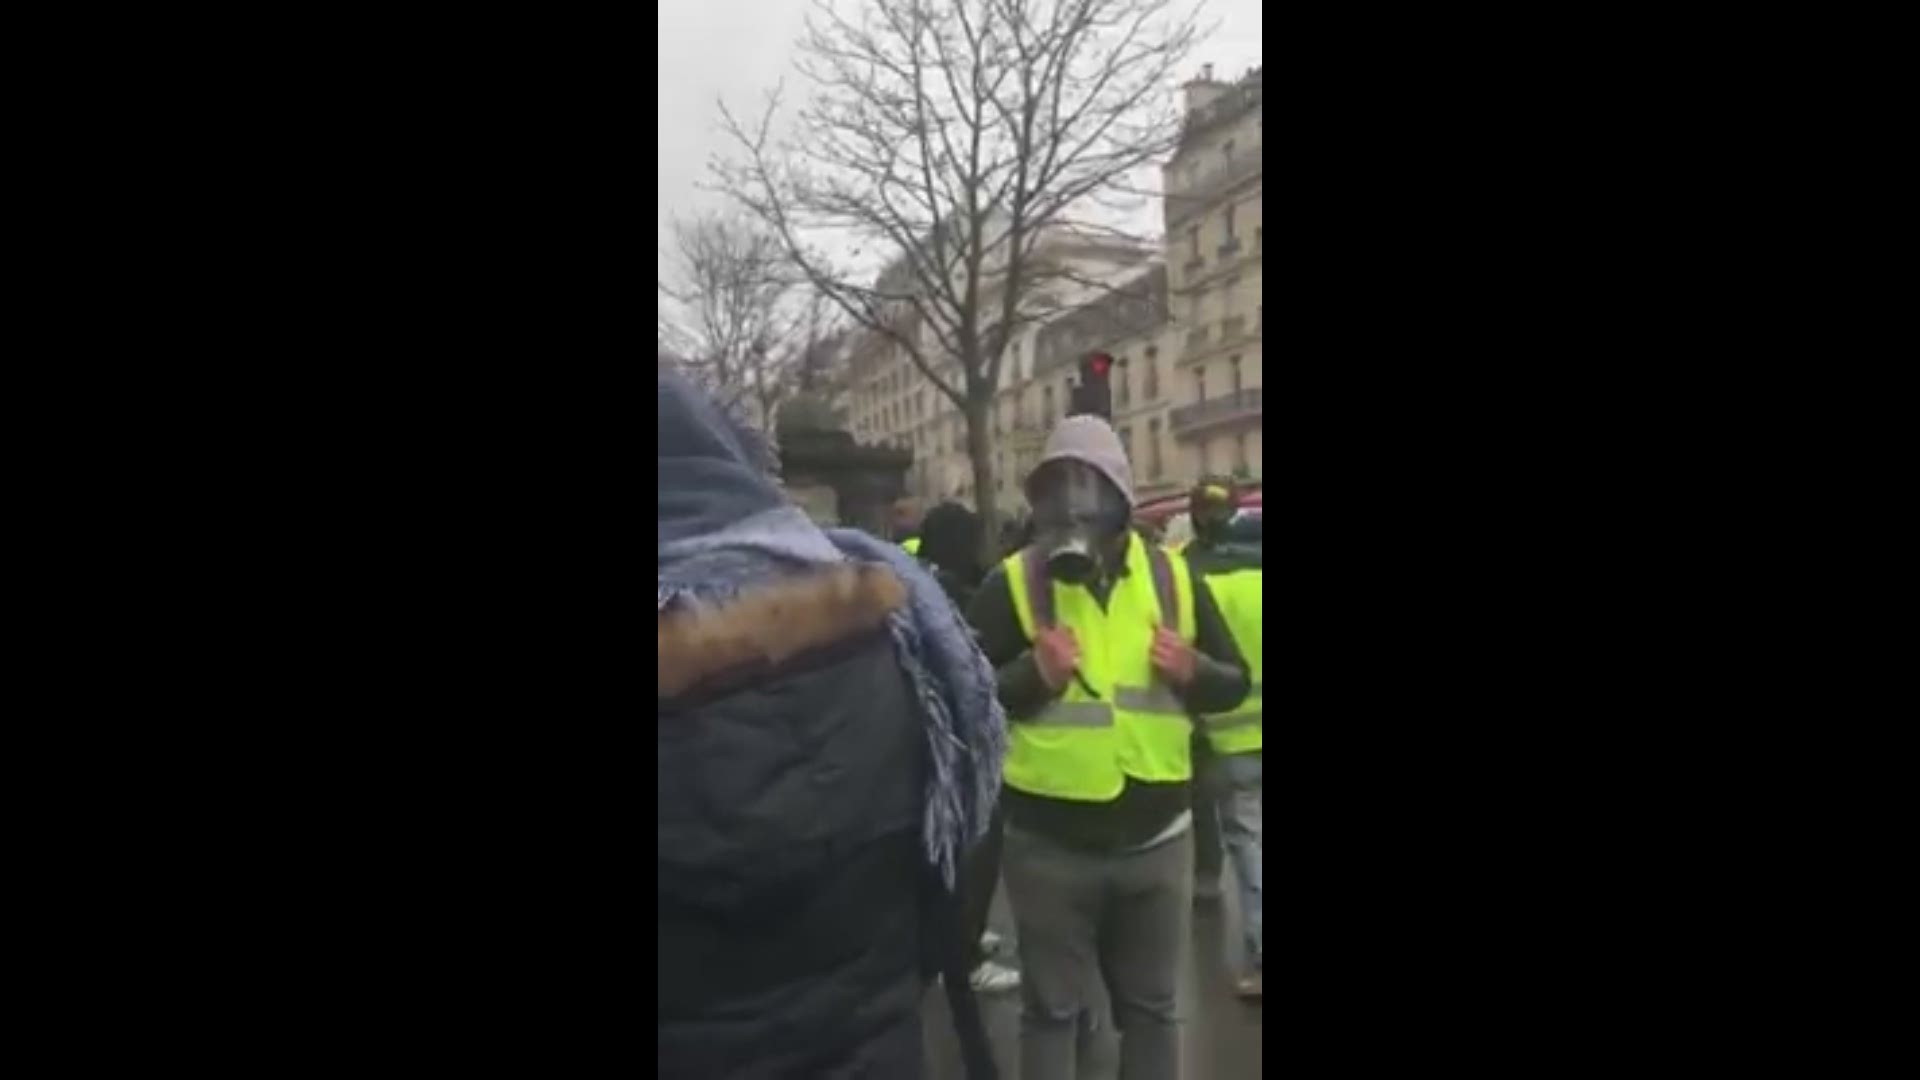 In addition to rising taxes, demonstrators are furious about President Emmanuel Macron's leadership, saying his government does not care about ordinary people.